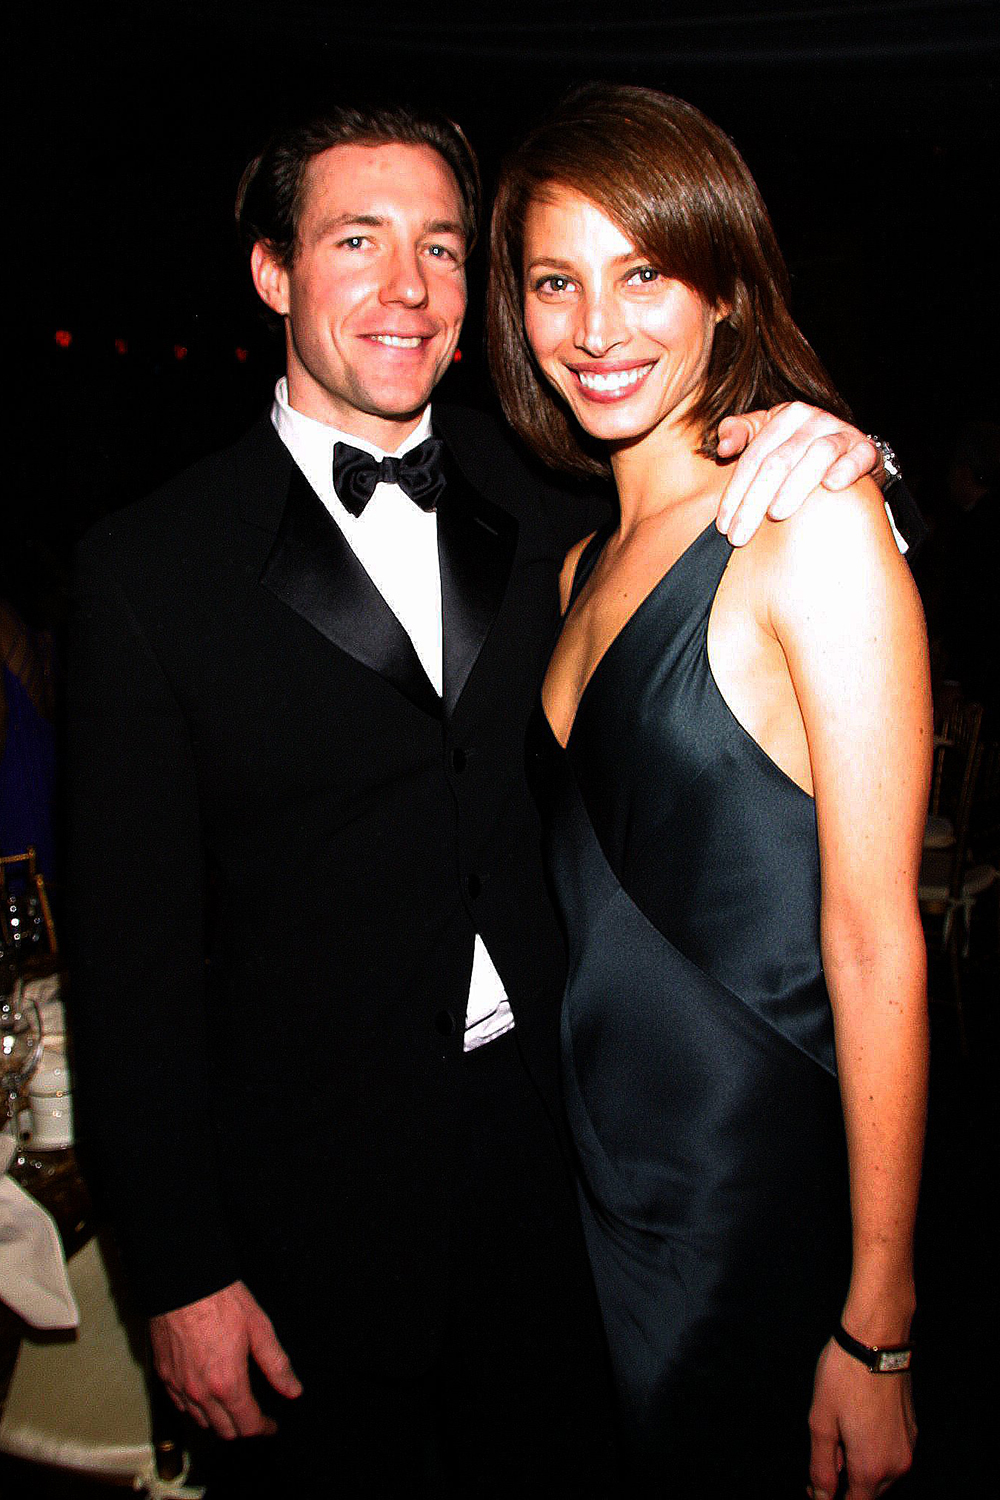 Christy Turlington has been married to Ed Burns since 2003.